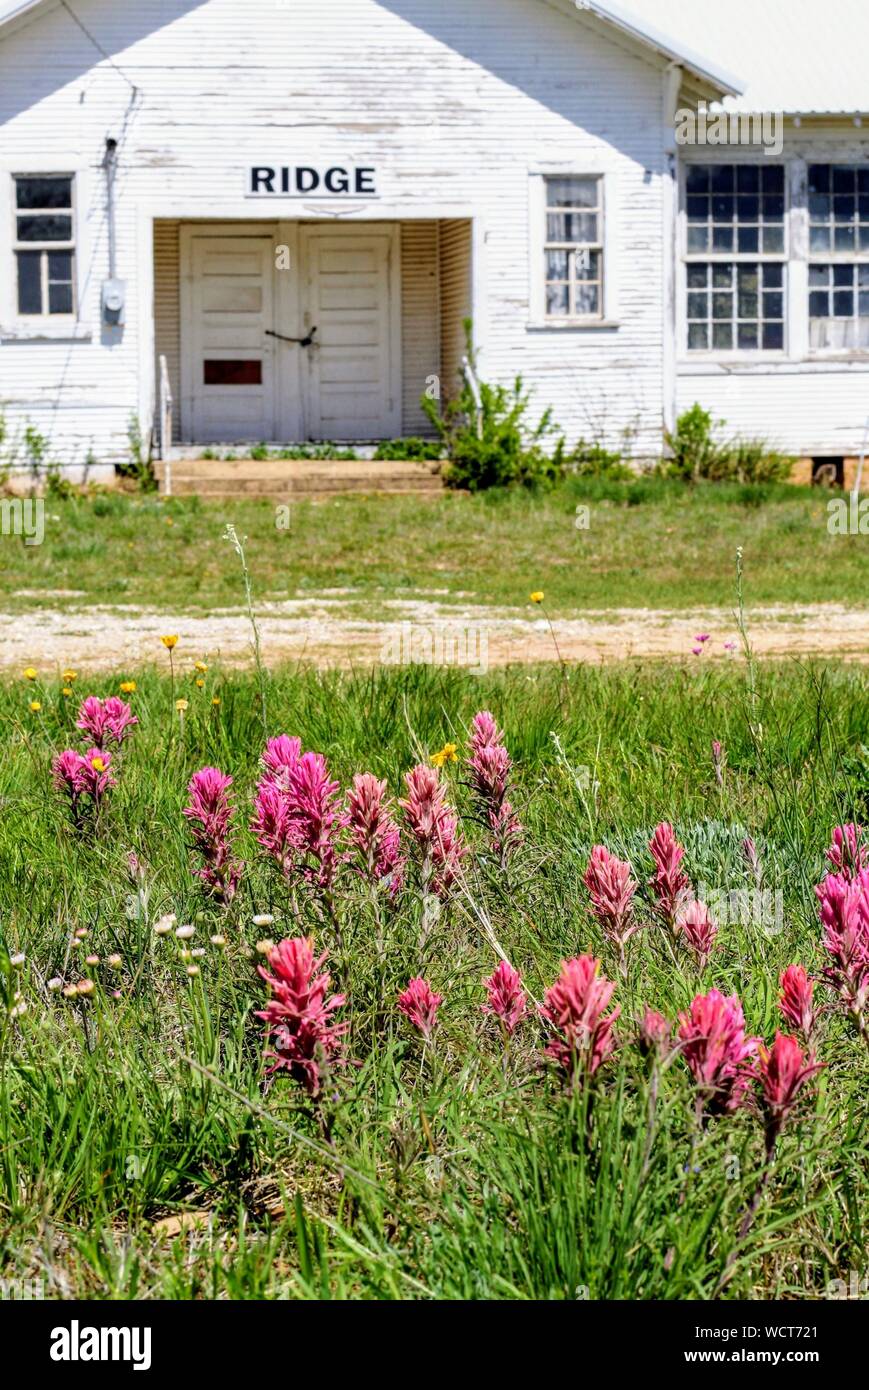 Indian Paintbrush blooming in front of the closed Ridge, Texas Post Office. Stock Photo